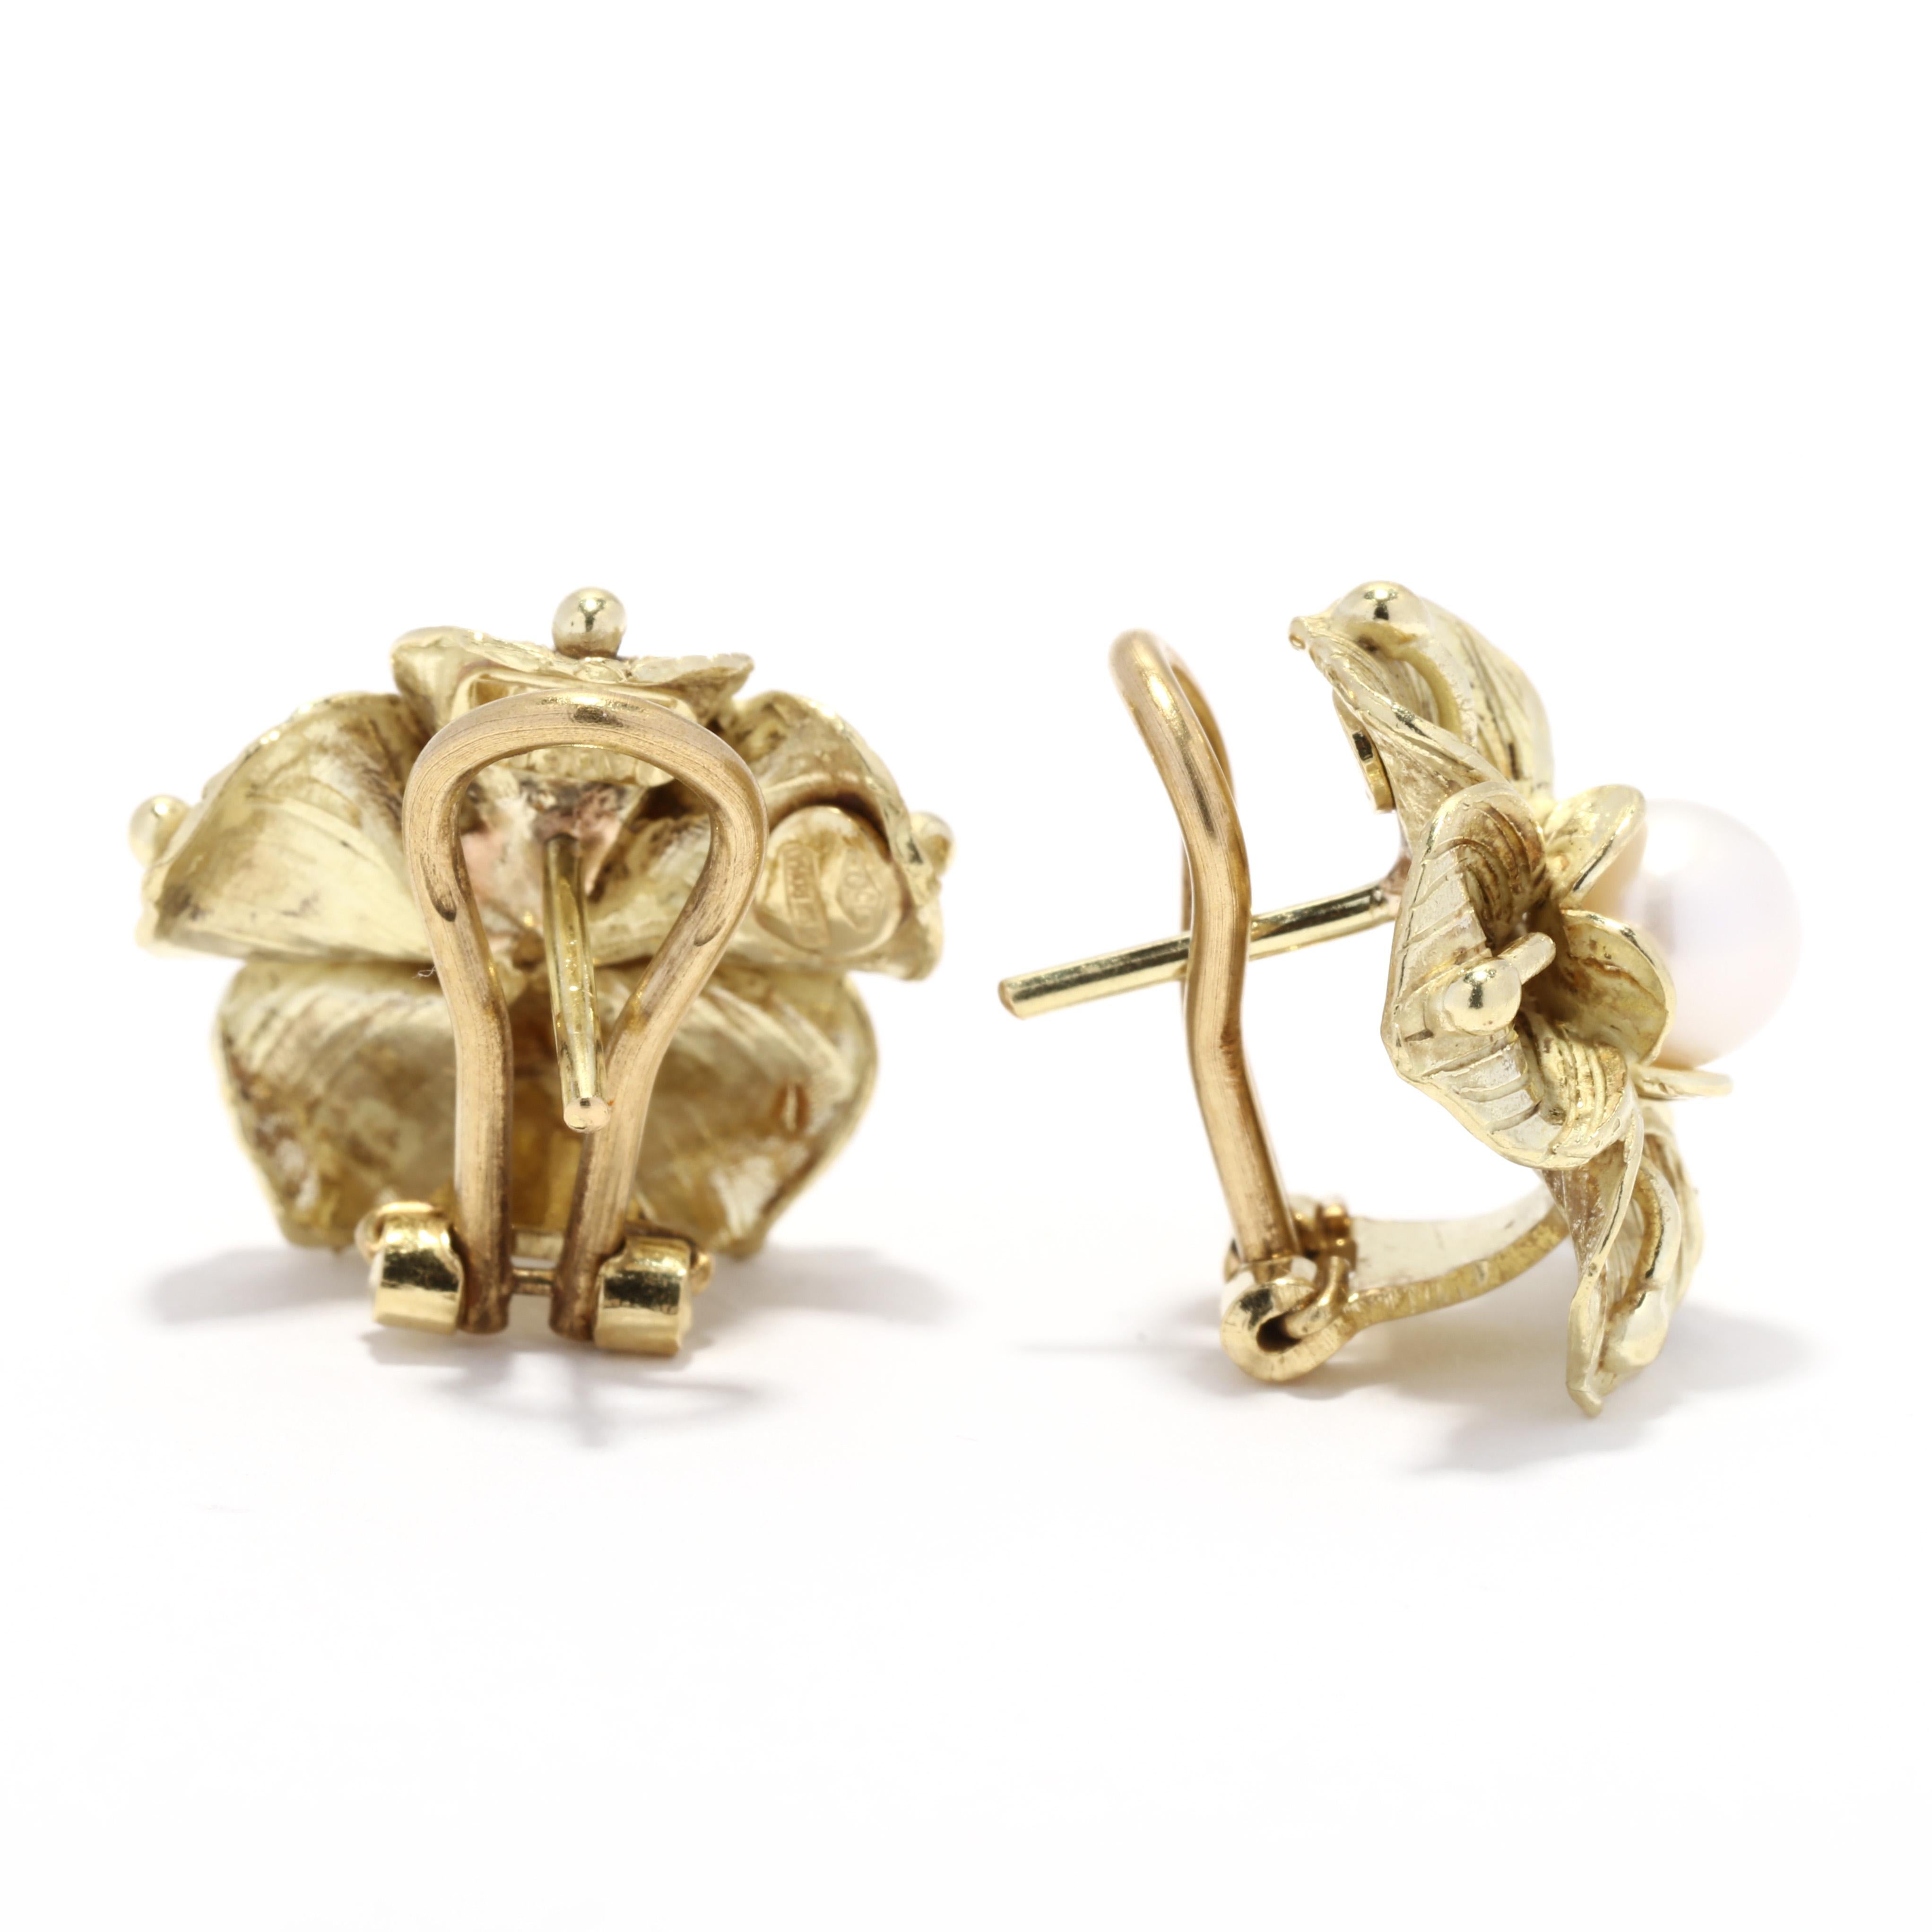 A pair of vintage 18 karat yellow gold cultured pearl flower earrings. These earrings feature three dimensional flower earrings with a matte finish, each with a 6mm white cultured pearl set in the center and with pierced omega backs.

Stones:
-